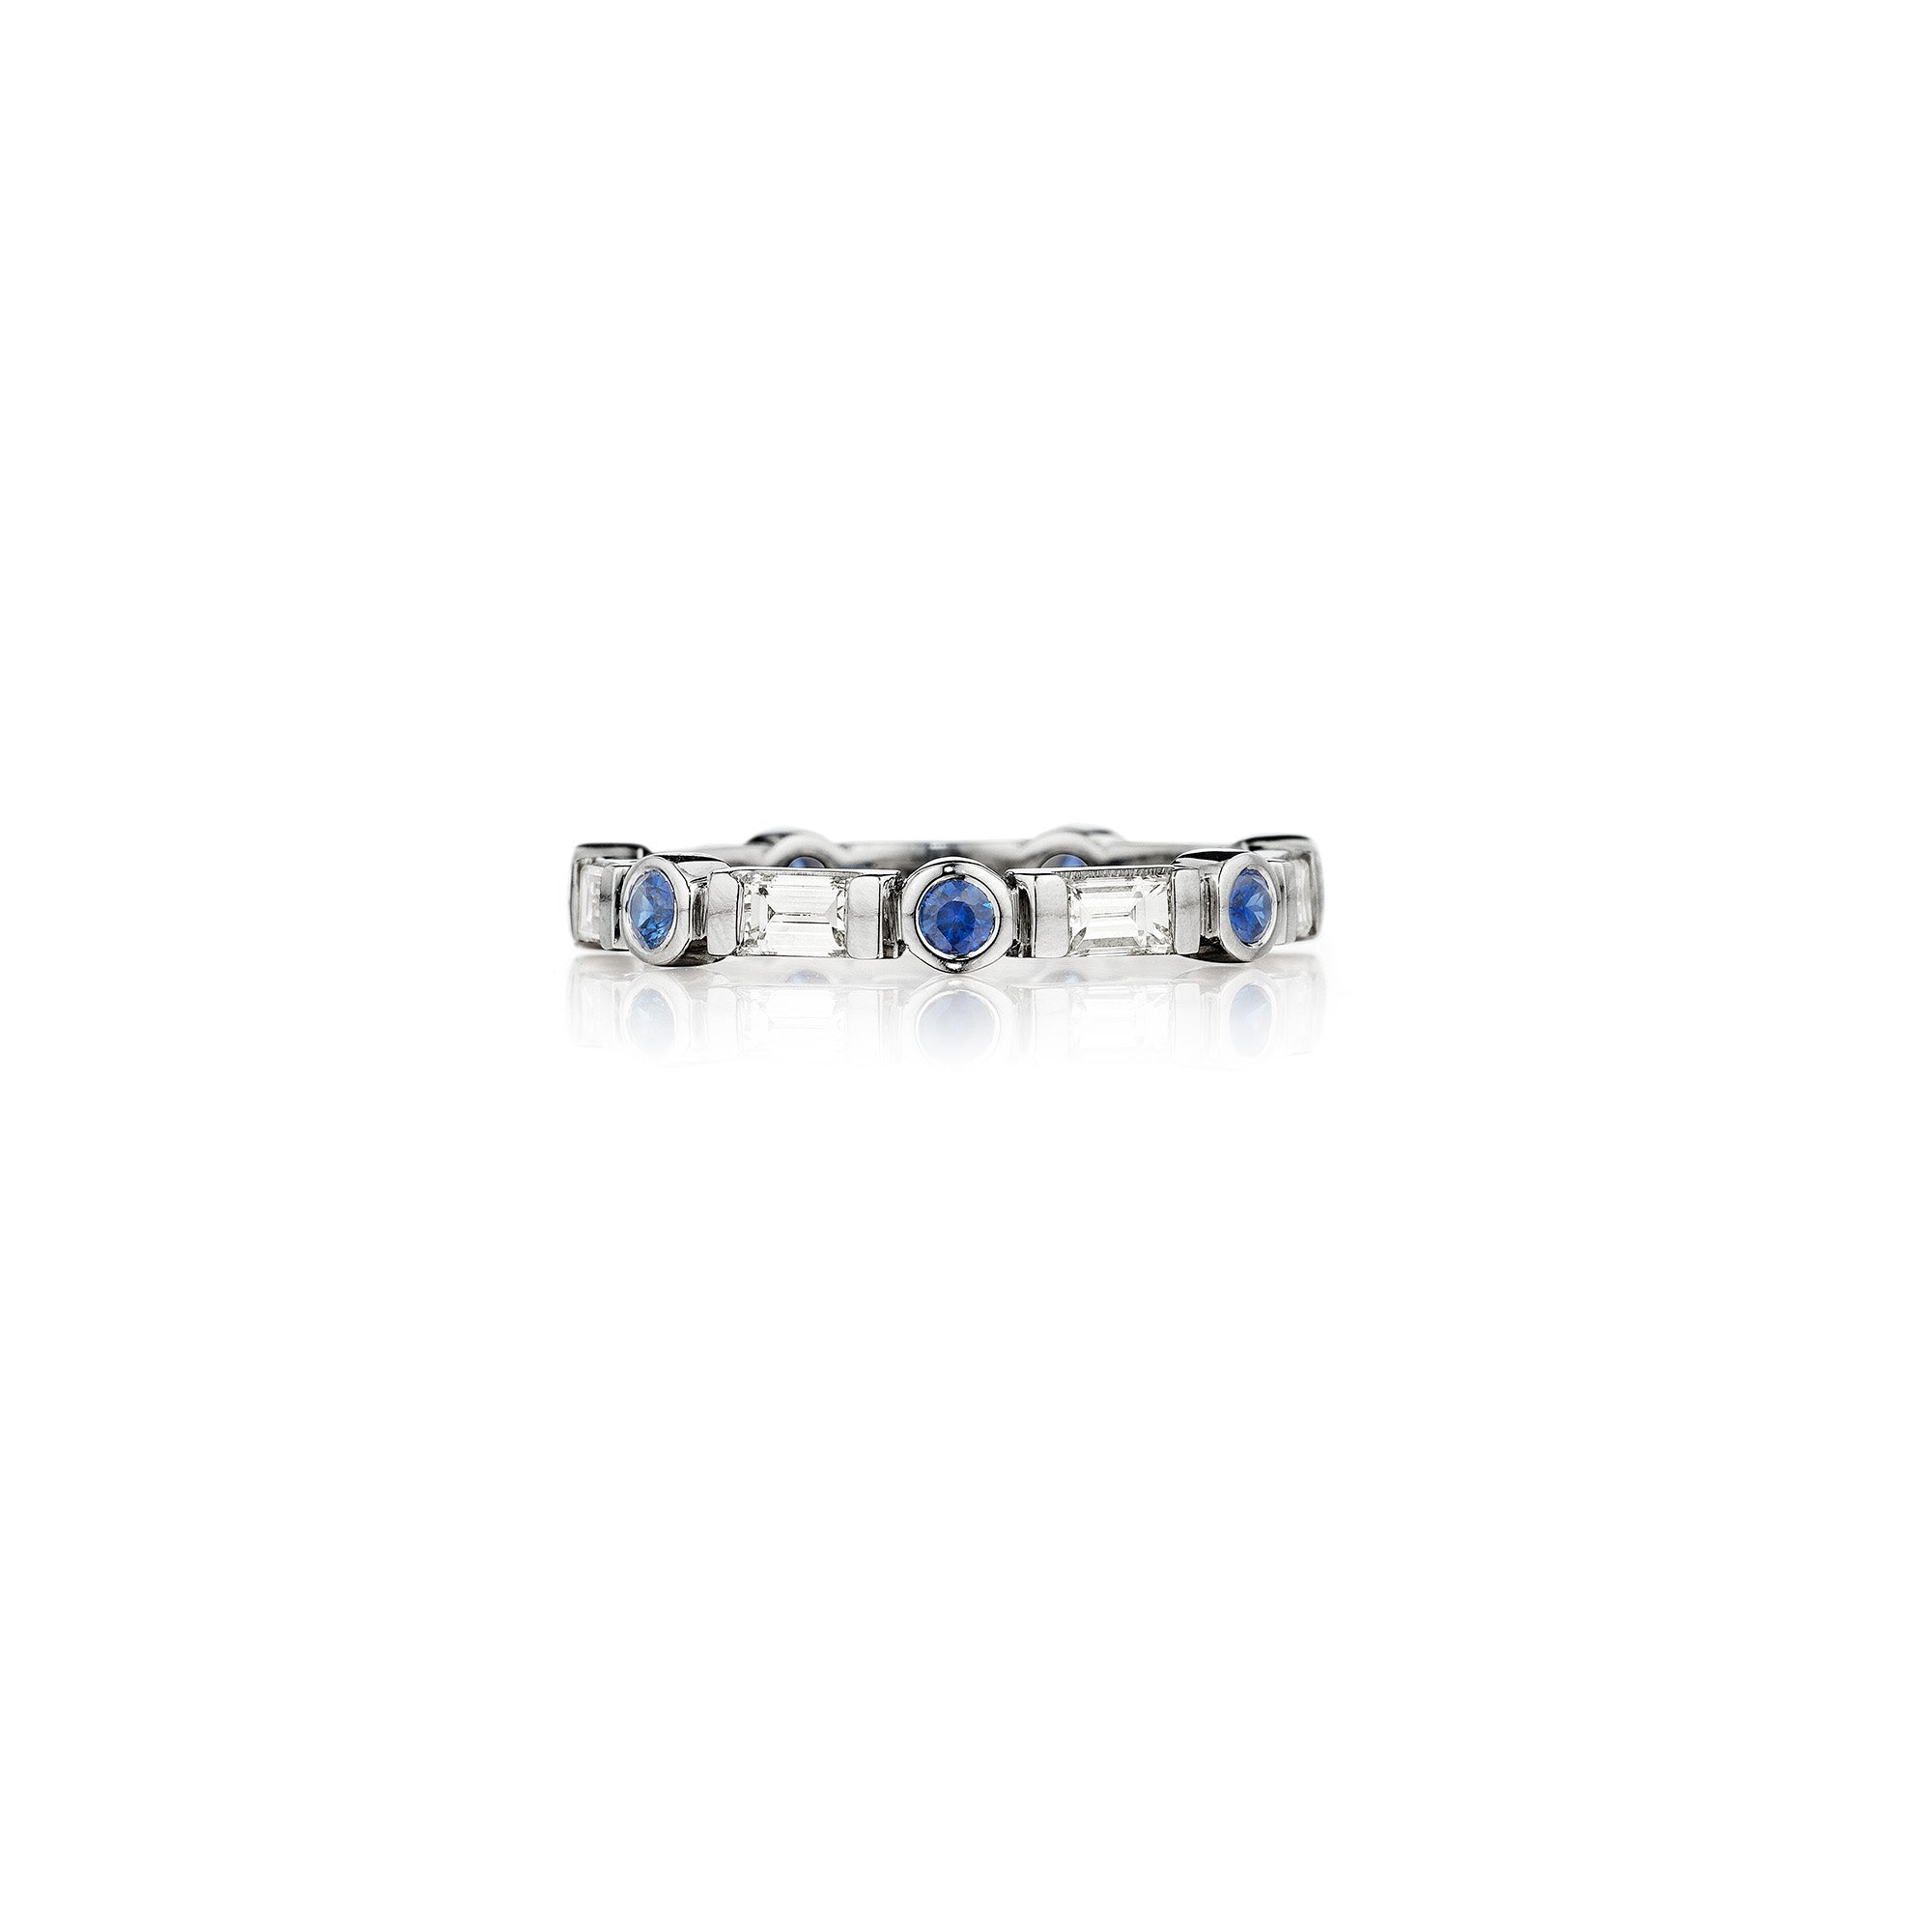 Penny Preville 18k White Gold Diamond And Colored Gemstone Ring